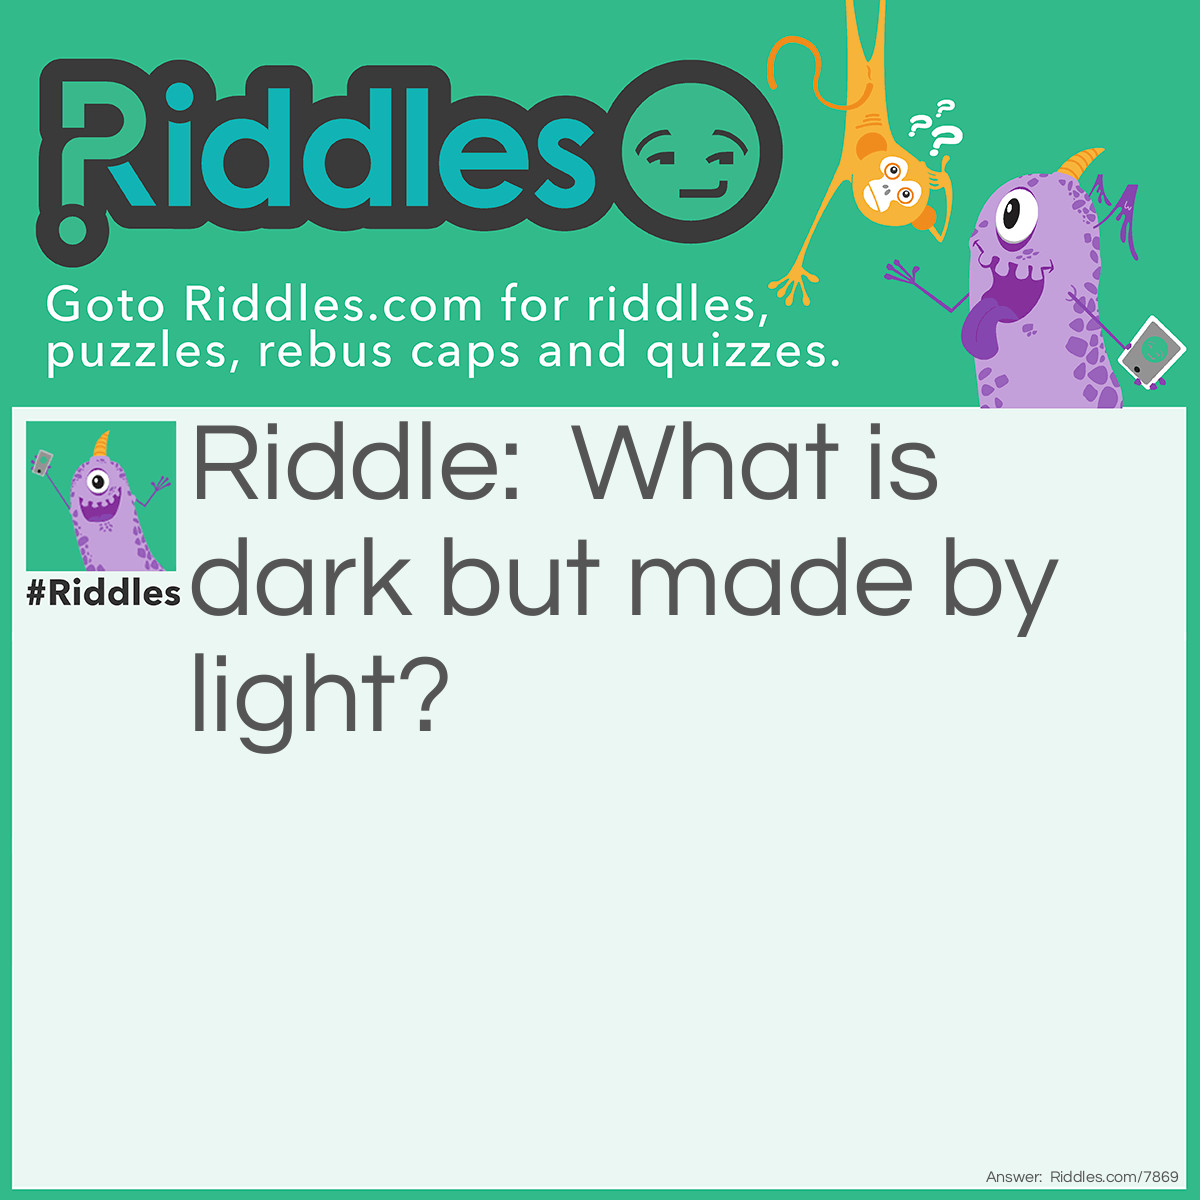 Riddle: What is dark but made by light? Answer: A shadow. A shadow is a<span style="caret-color: #202124; color: #202124; font-family: arial, sans-serif; font-size: 14px; font-style: normal; font-variant-caps: normal; font-weight: 400; letter-spacing: normal; orphans: auto; text-align: left; text-indent: 0px; text-transform: none; white-space: normal; widows: auto; word-spacing: 0px; -webkit-text-size-adjust: auto; -webkit-text-stroke-width: 0px; background-color: #ffffff; text-decoration: none; display: inline !important; float: none;"> dark area or shape produced by an object coming between rays of light and a surface.</span>